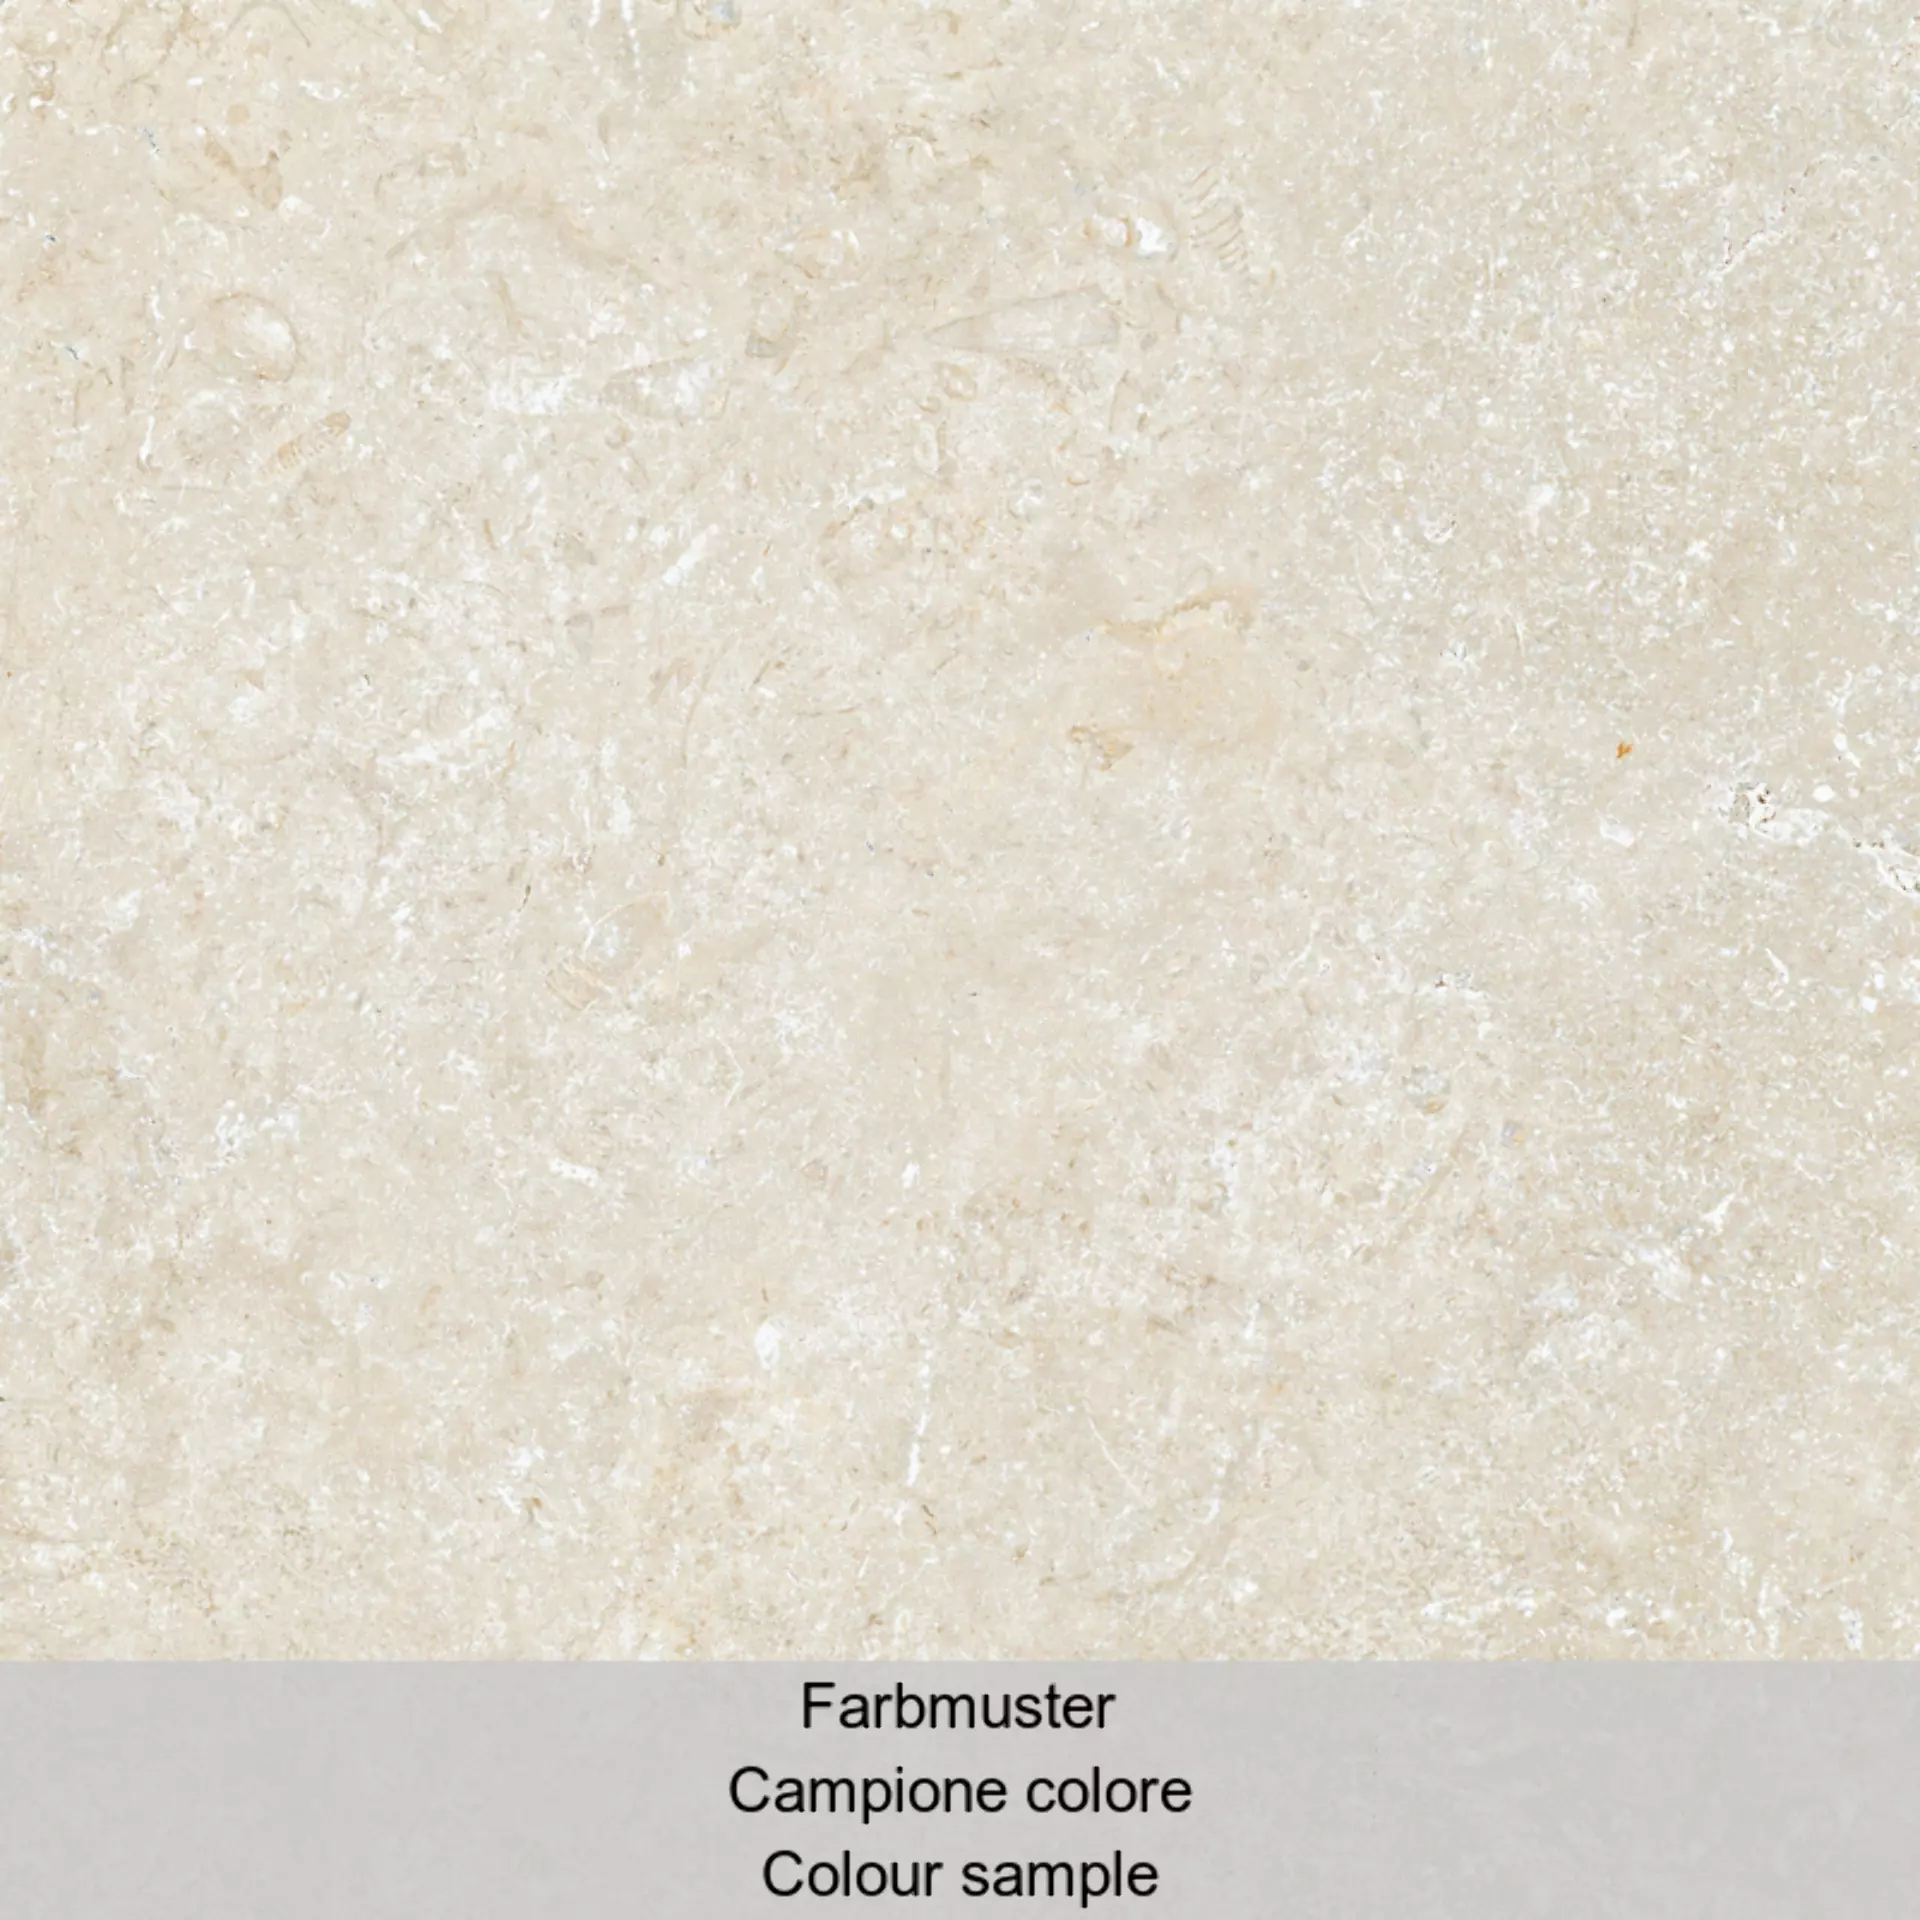 Cottodeste Secret Stone Mystery White Hammered EGGSS90 90x90cm rectified 20mm